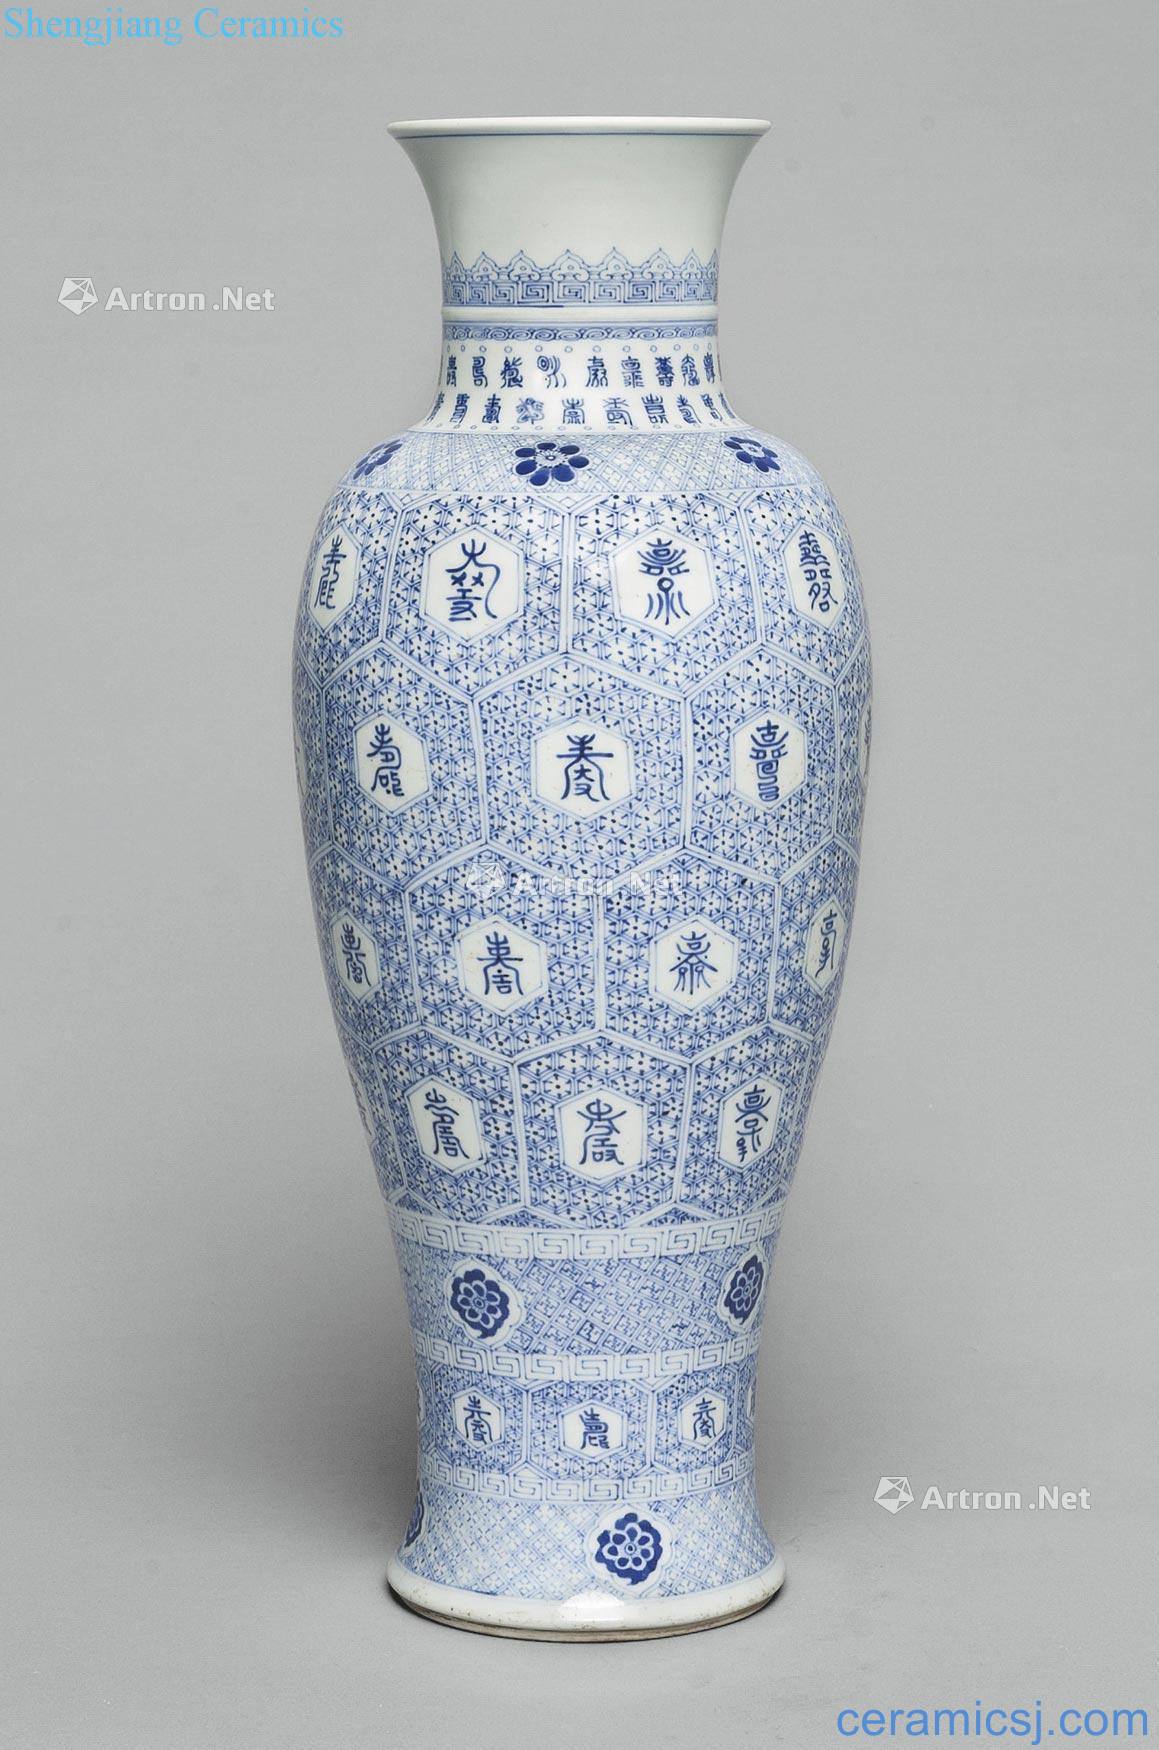 Qing dynasty in the 19th century Shou wen bottles of blue and white